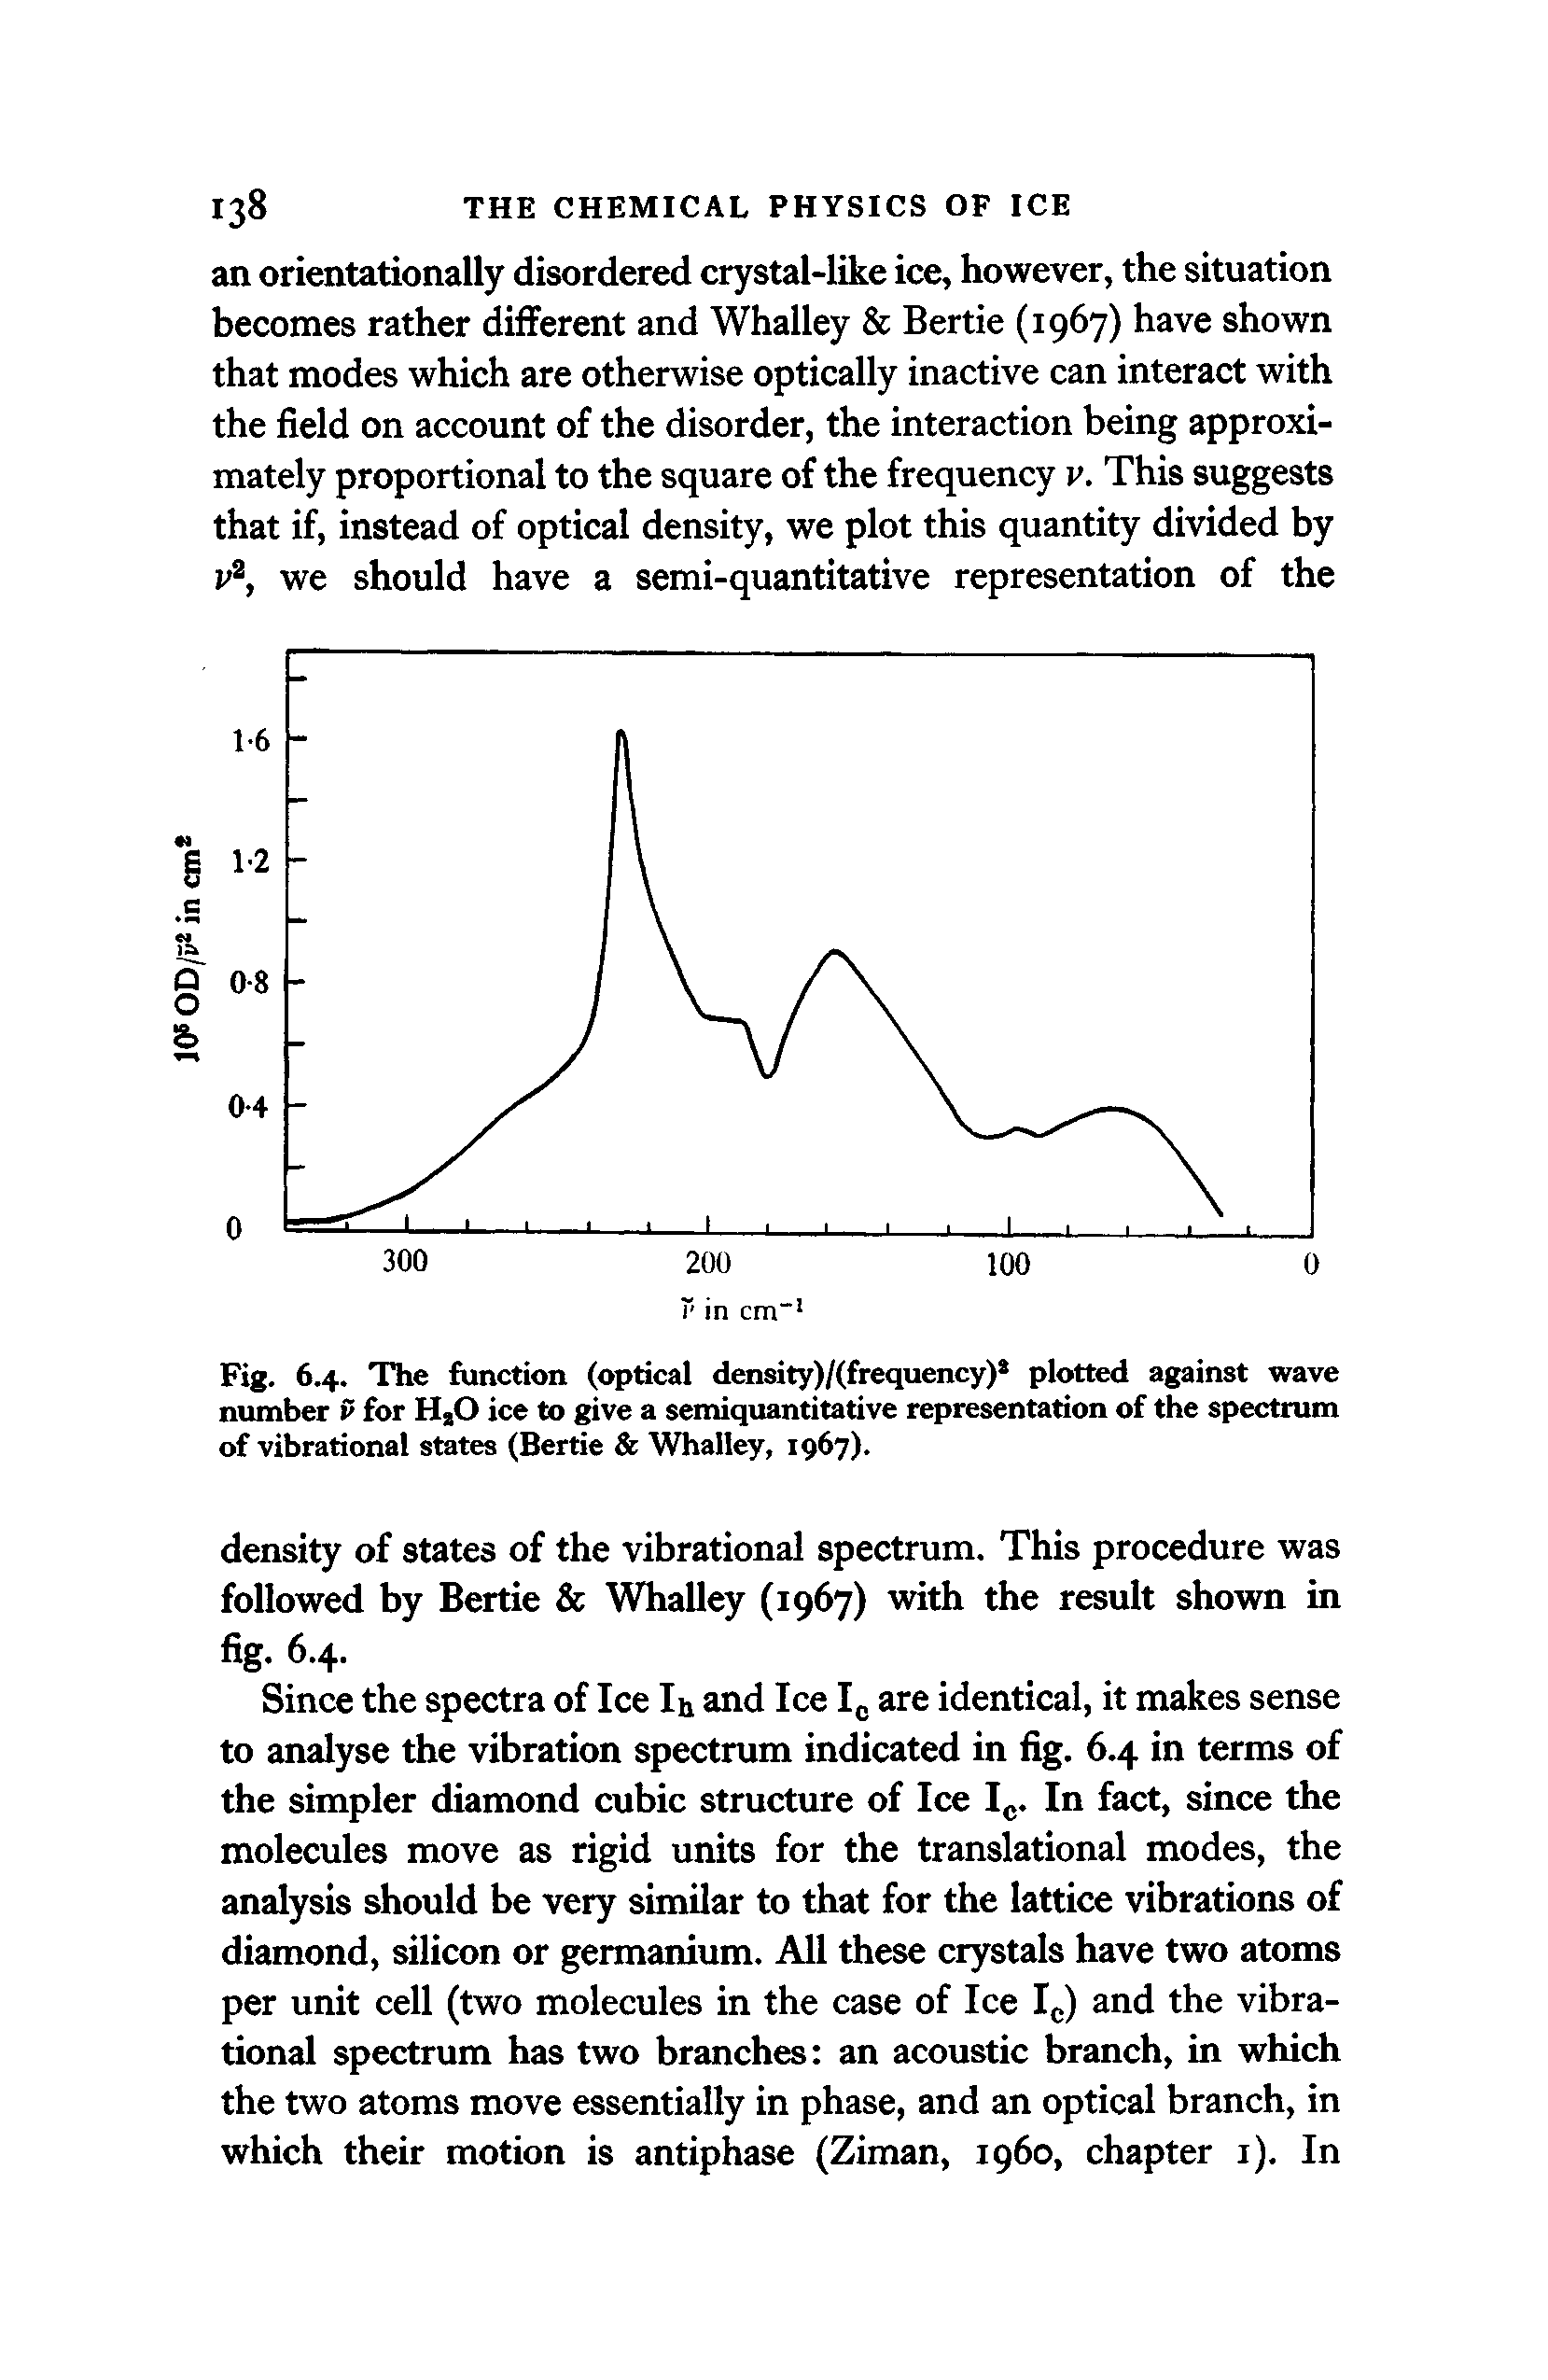 Fig. 6.4. The function (optical density)/(frequency) plotted against wave number P for HjO ice to give a semiquantitative representation of the spectrum of vibrational states (Bertie Whalley, 1967).